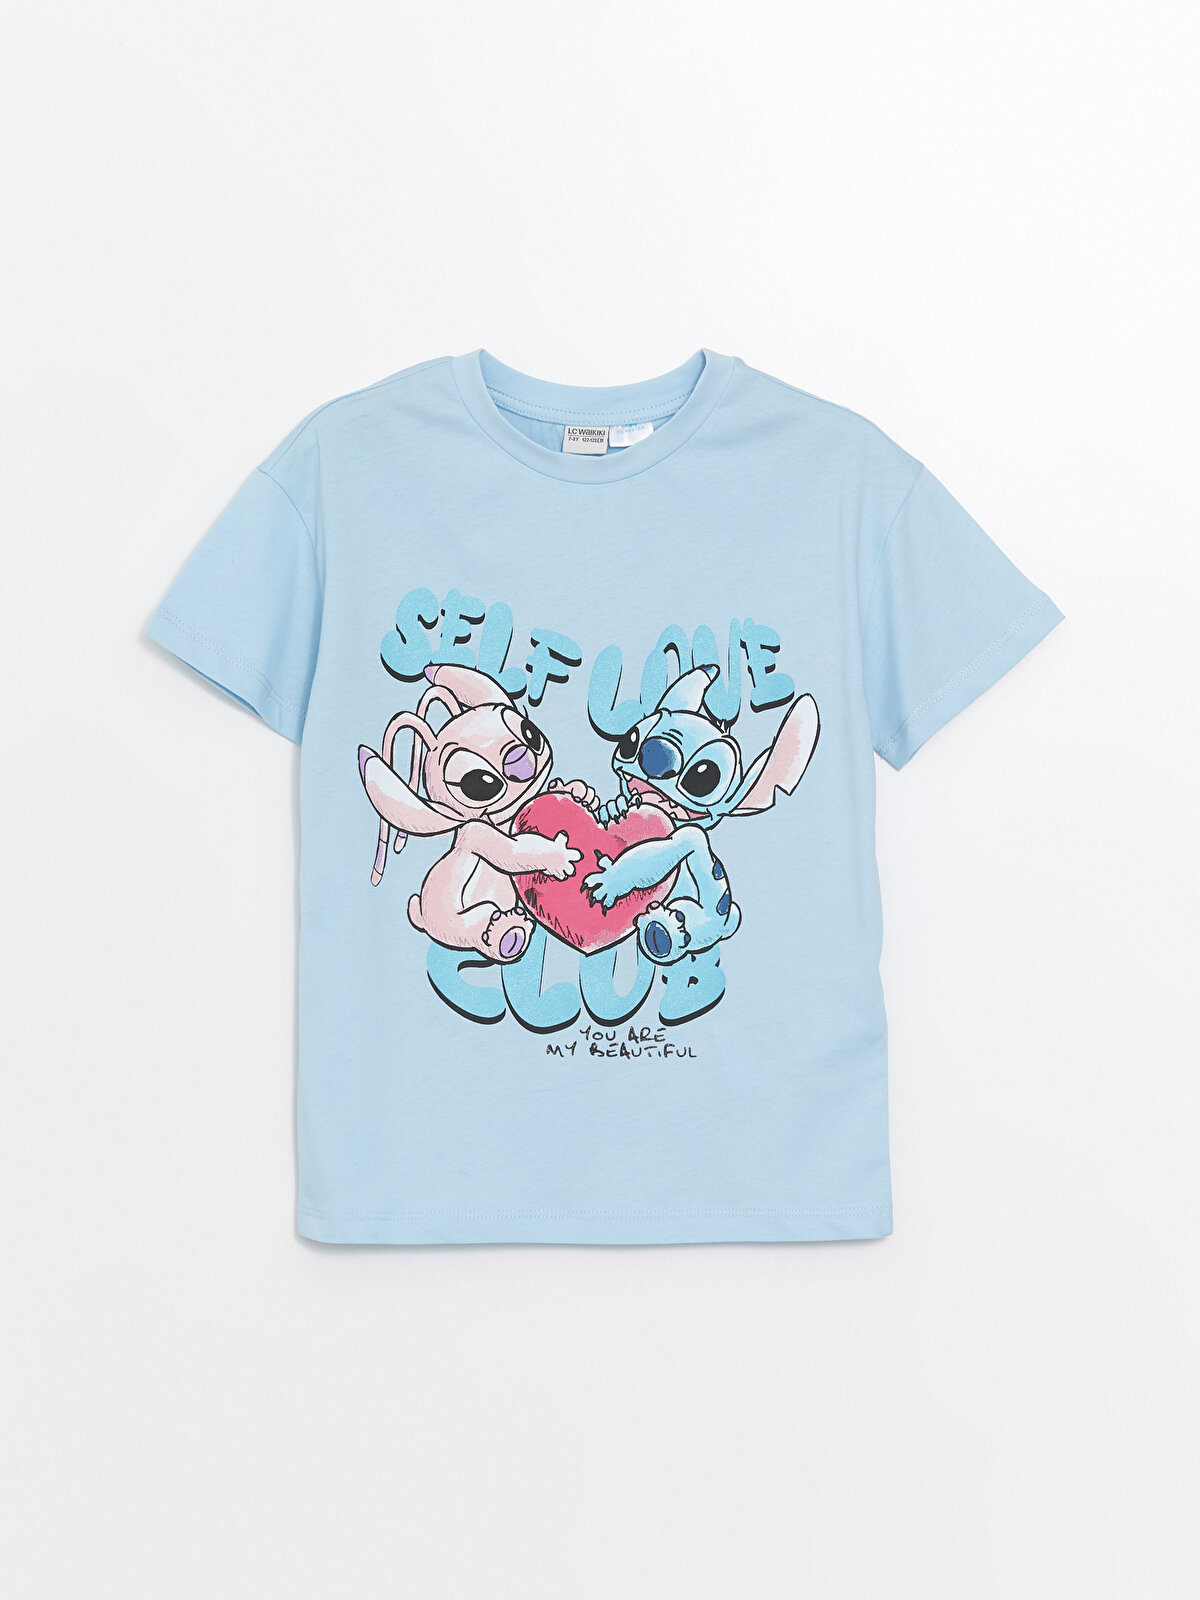 LCW Kids Crew Neck Lilo and Stitch Printed Short-Sleeve Girl's T-Shirt